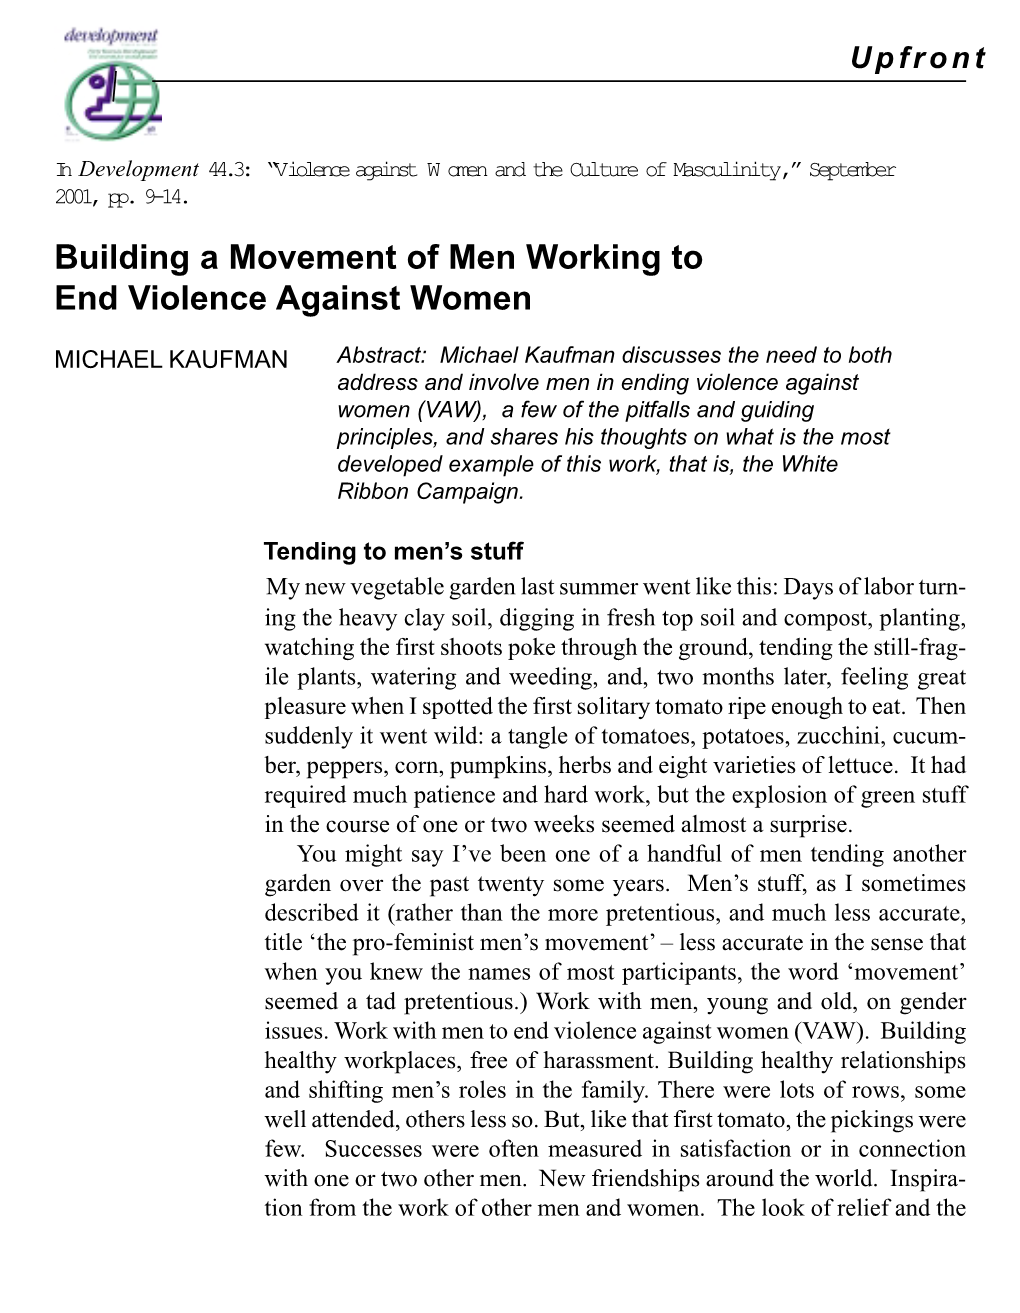 Building a Movement of Men Working to End Violence Against Women